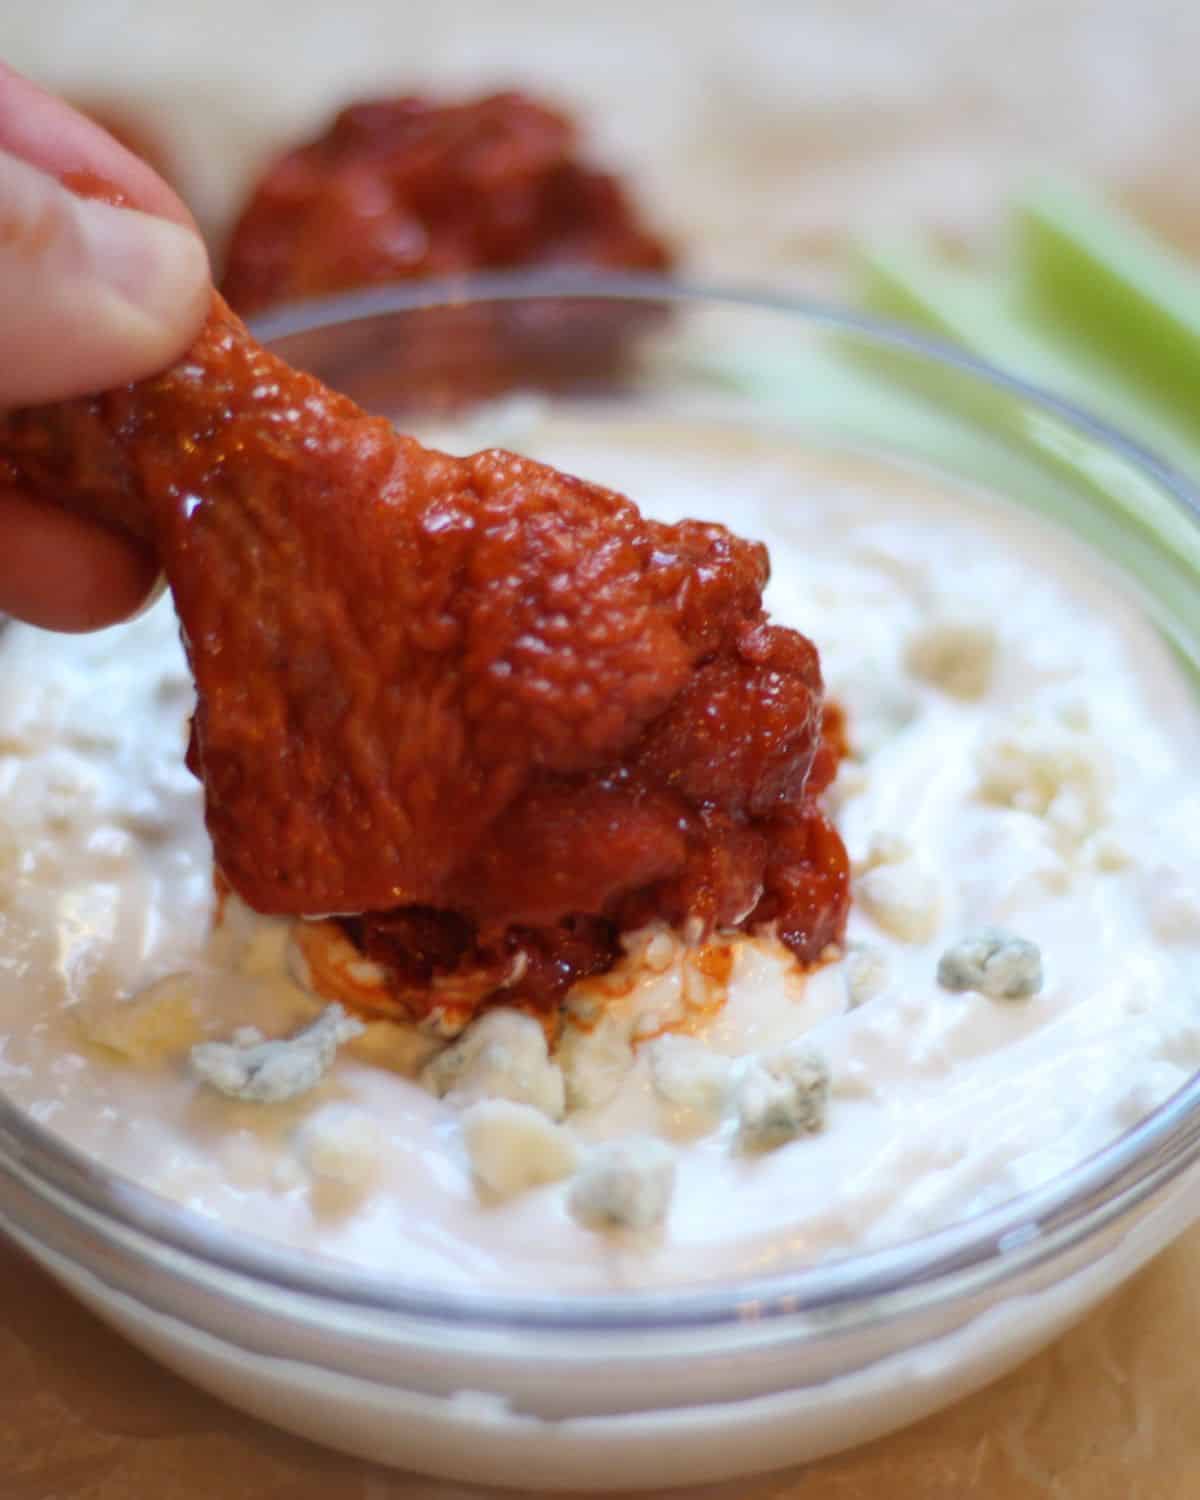 Buffalo chicken wing dipped in a chunky blue cheese dip